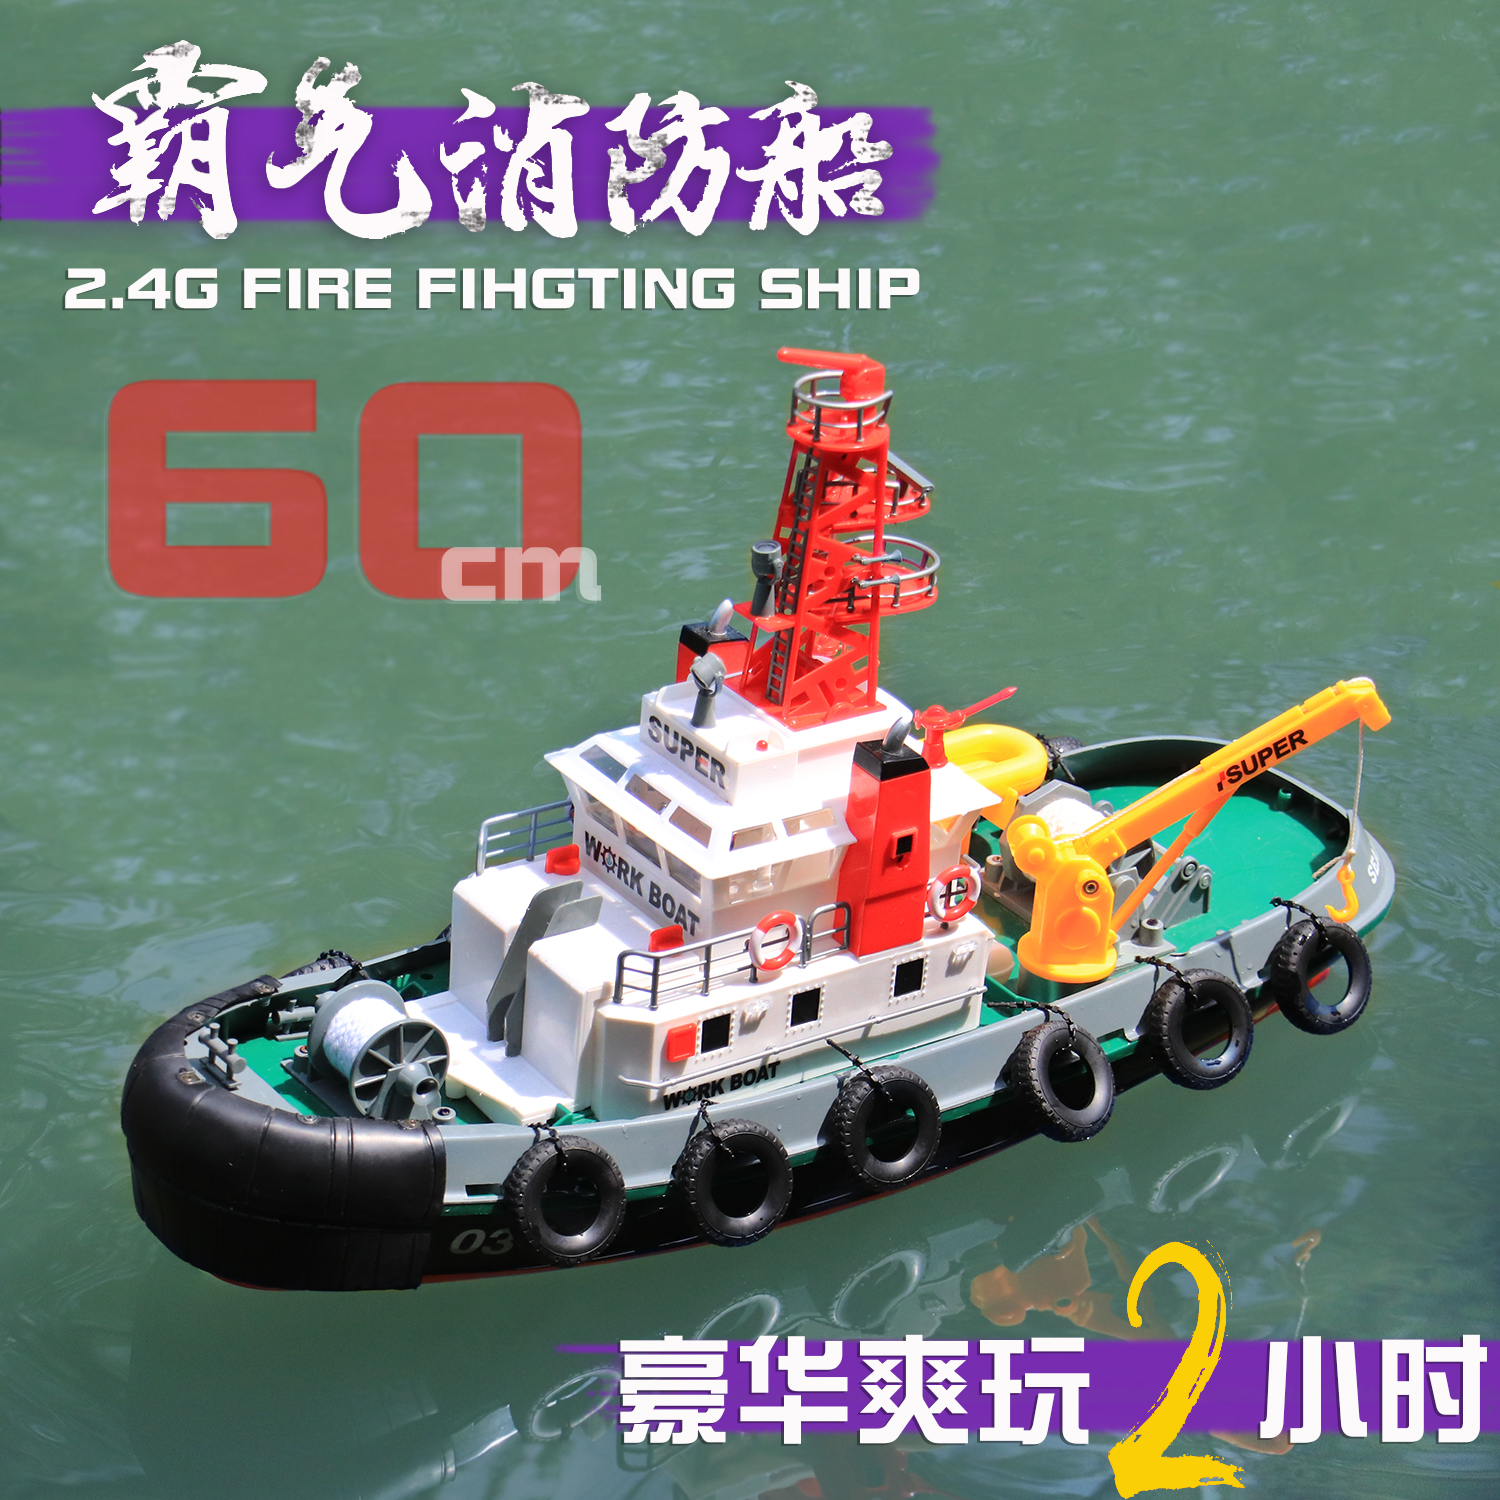 2.4G remote control ship simulation fire boat spray boat model gift toy high speed ultra long endurance rescue boat 3810